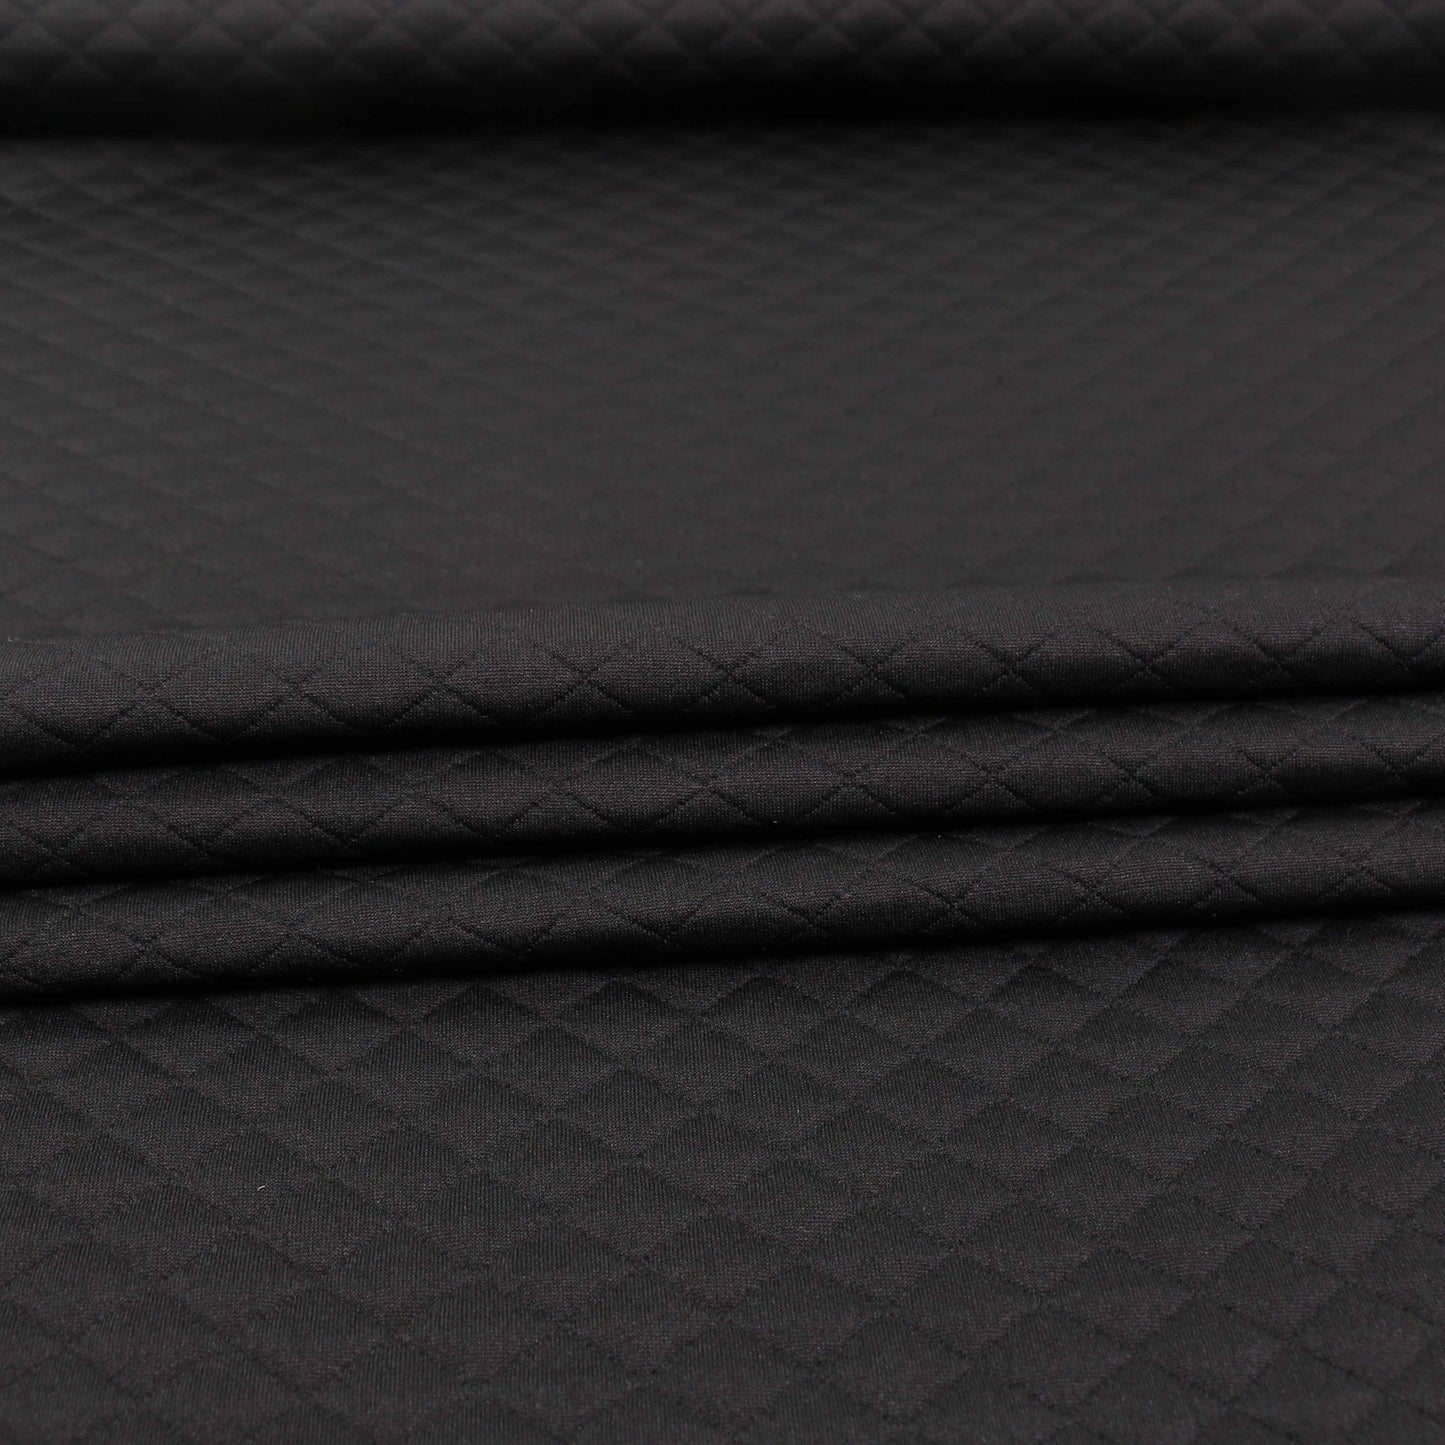 Quilted Jersey Fabric - Black diamond